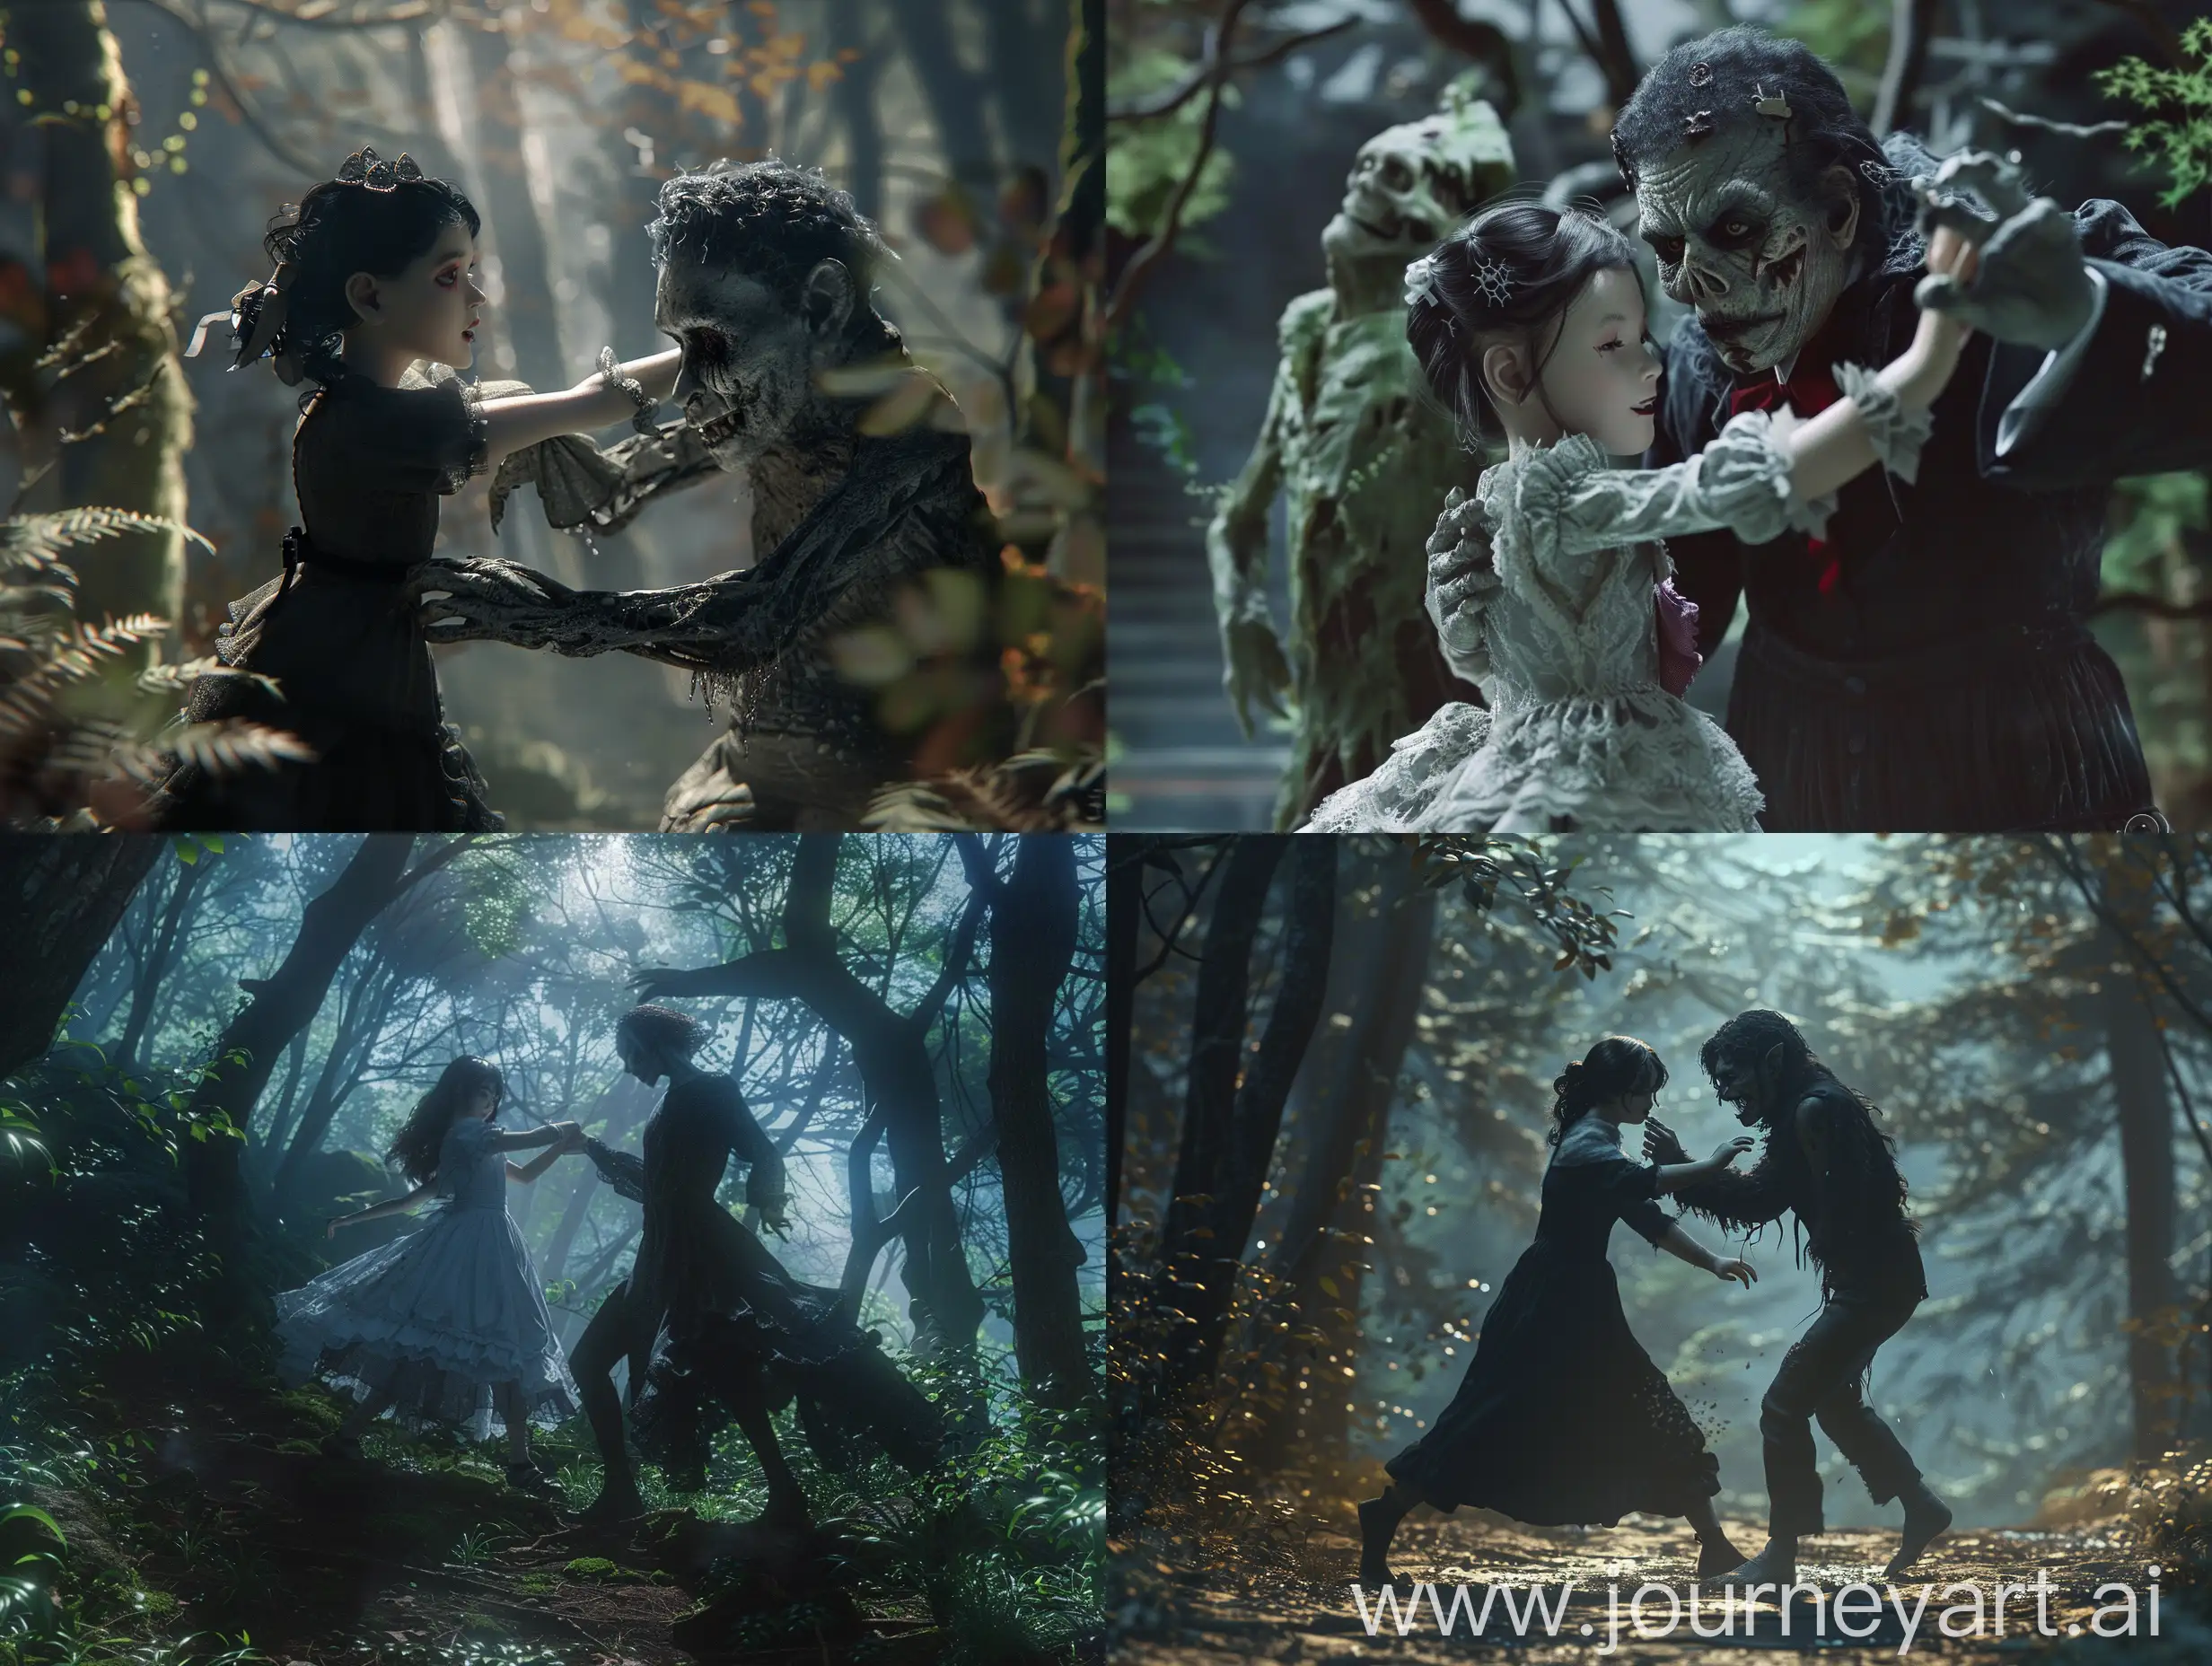 Fantasy-Movie-Scene-Japanese-Cute-Girl-and-Classic-Monsters-Dancing-in-Forest